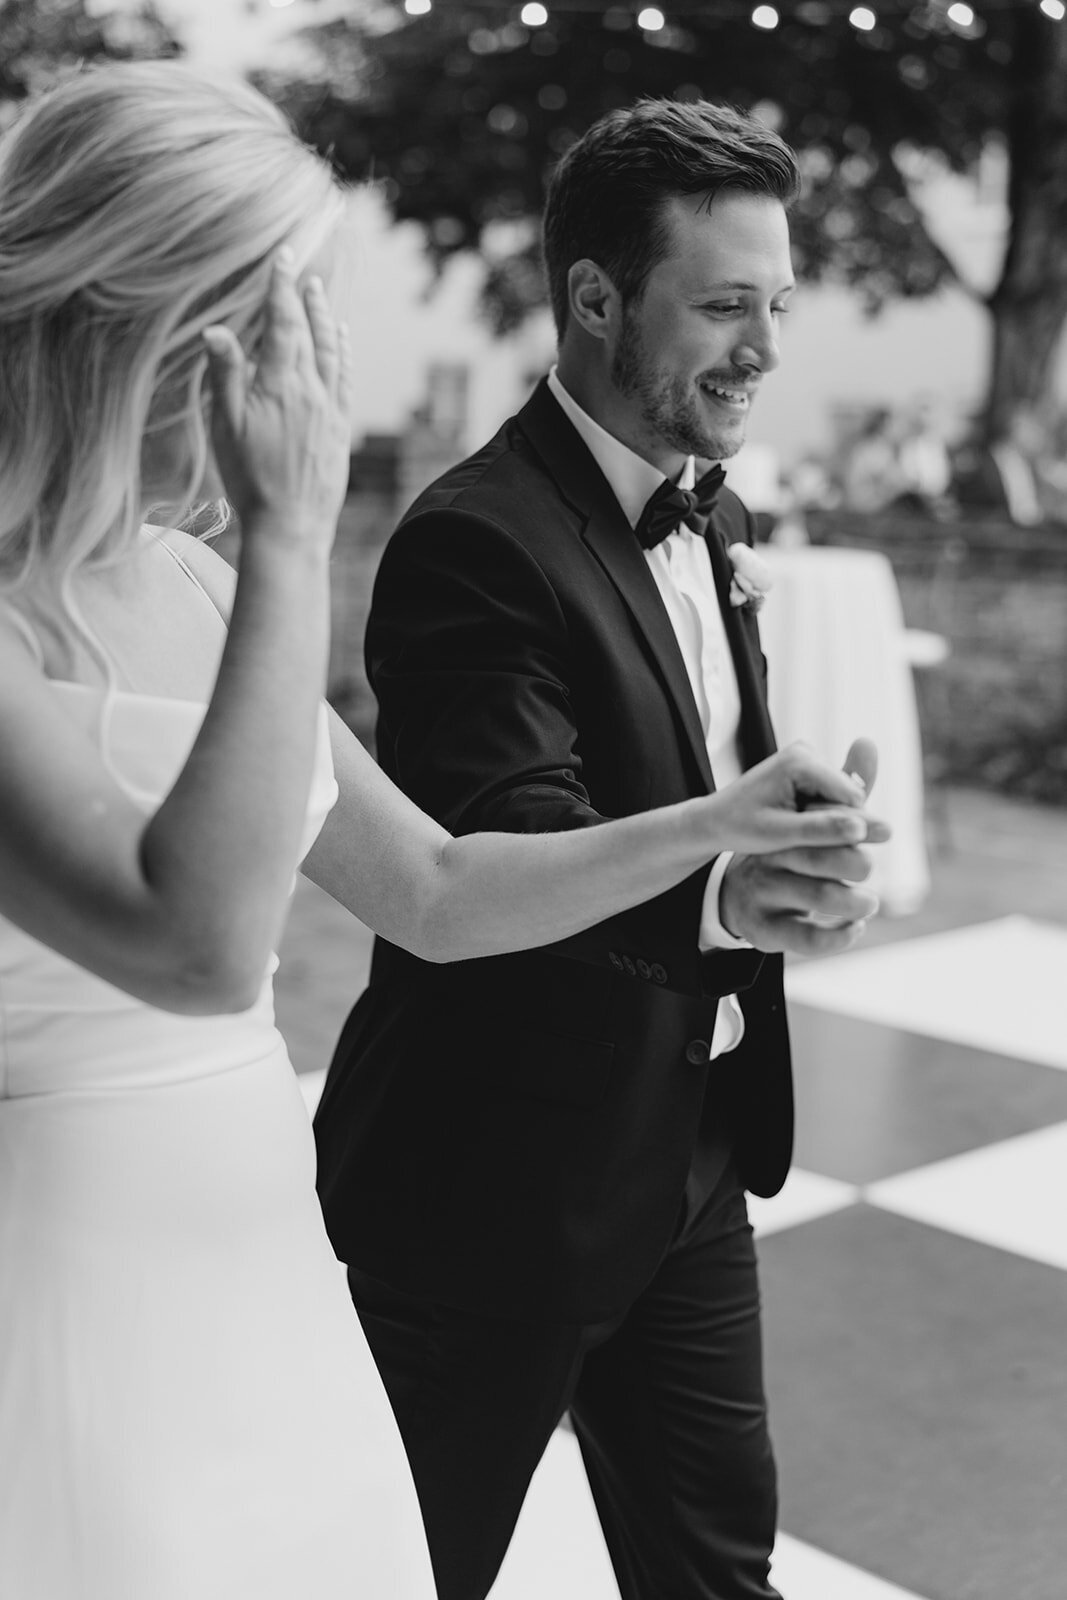 william_aiken_house_spring_wedding_reception_bride_and_groom_first_dance_black_and_white_intimate_moment_kailee_dimeglio_photography-1385_websize